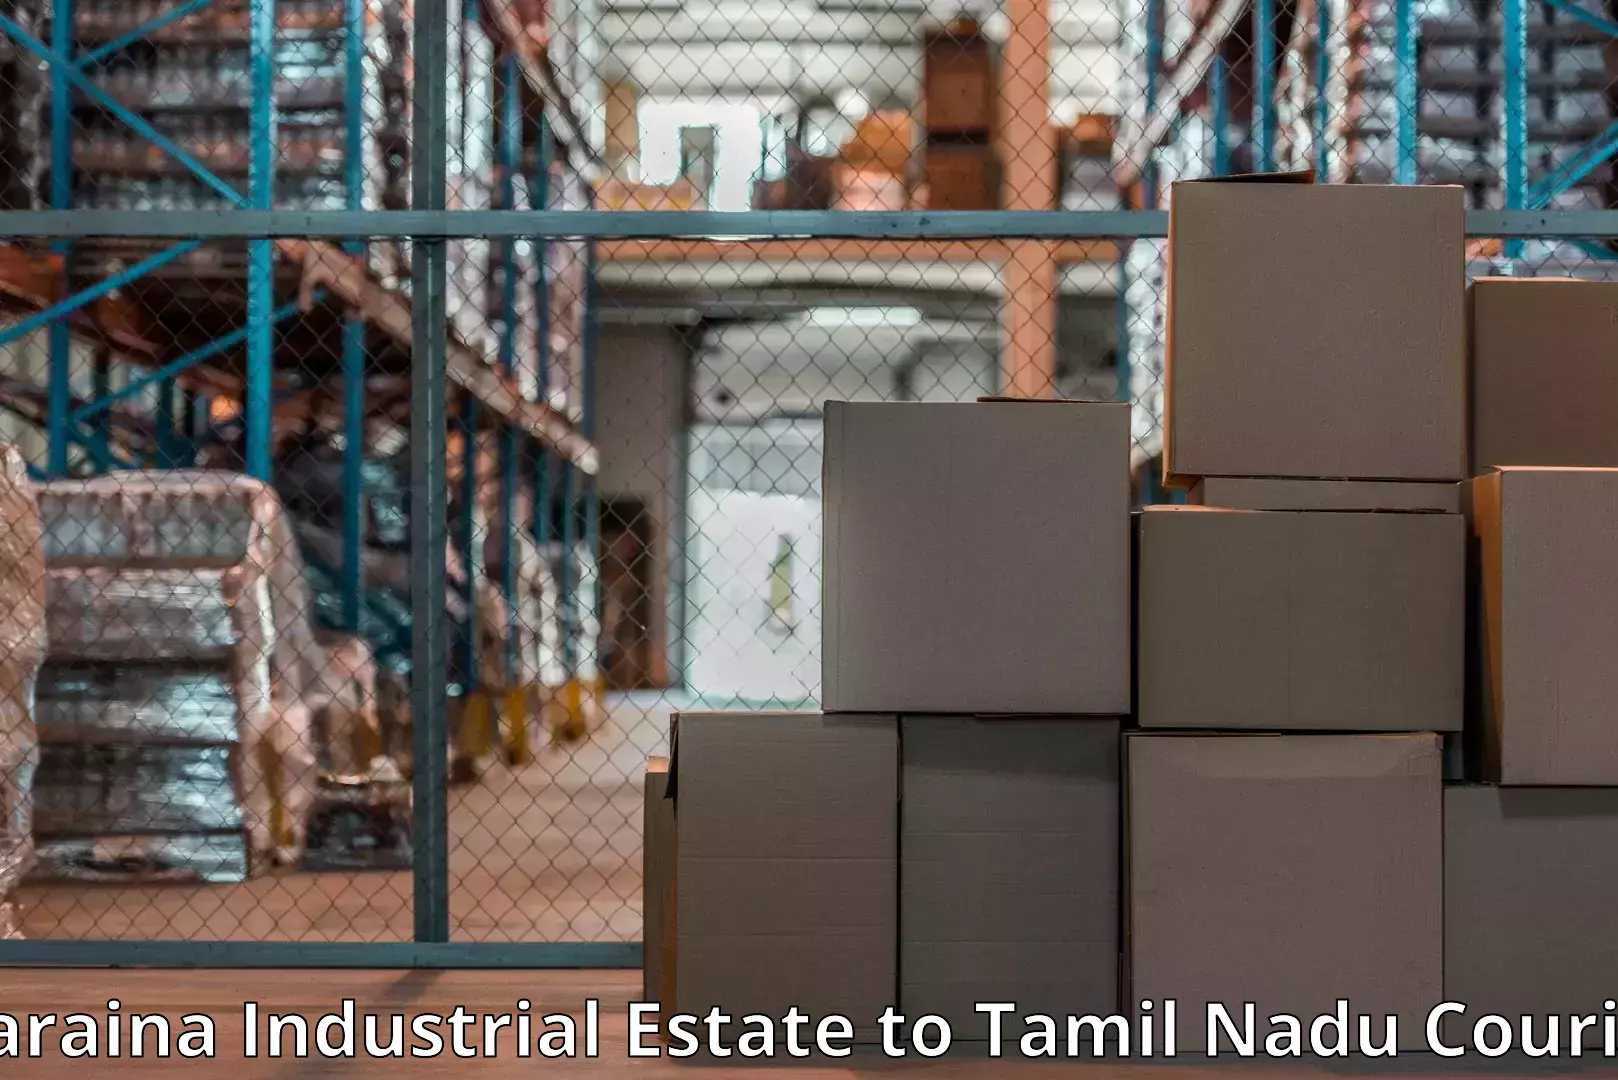 Customized relocation services Naraina Industrial Estate to Tamil Nadu